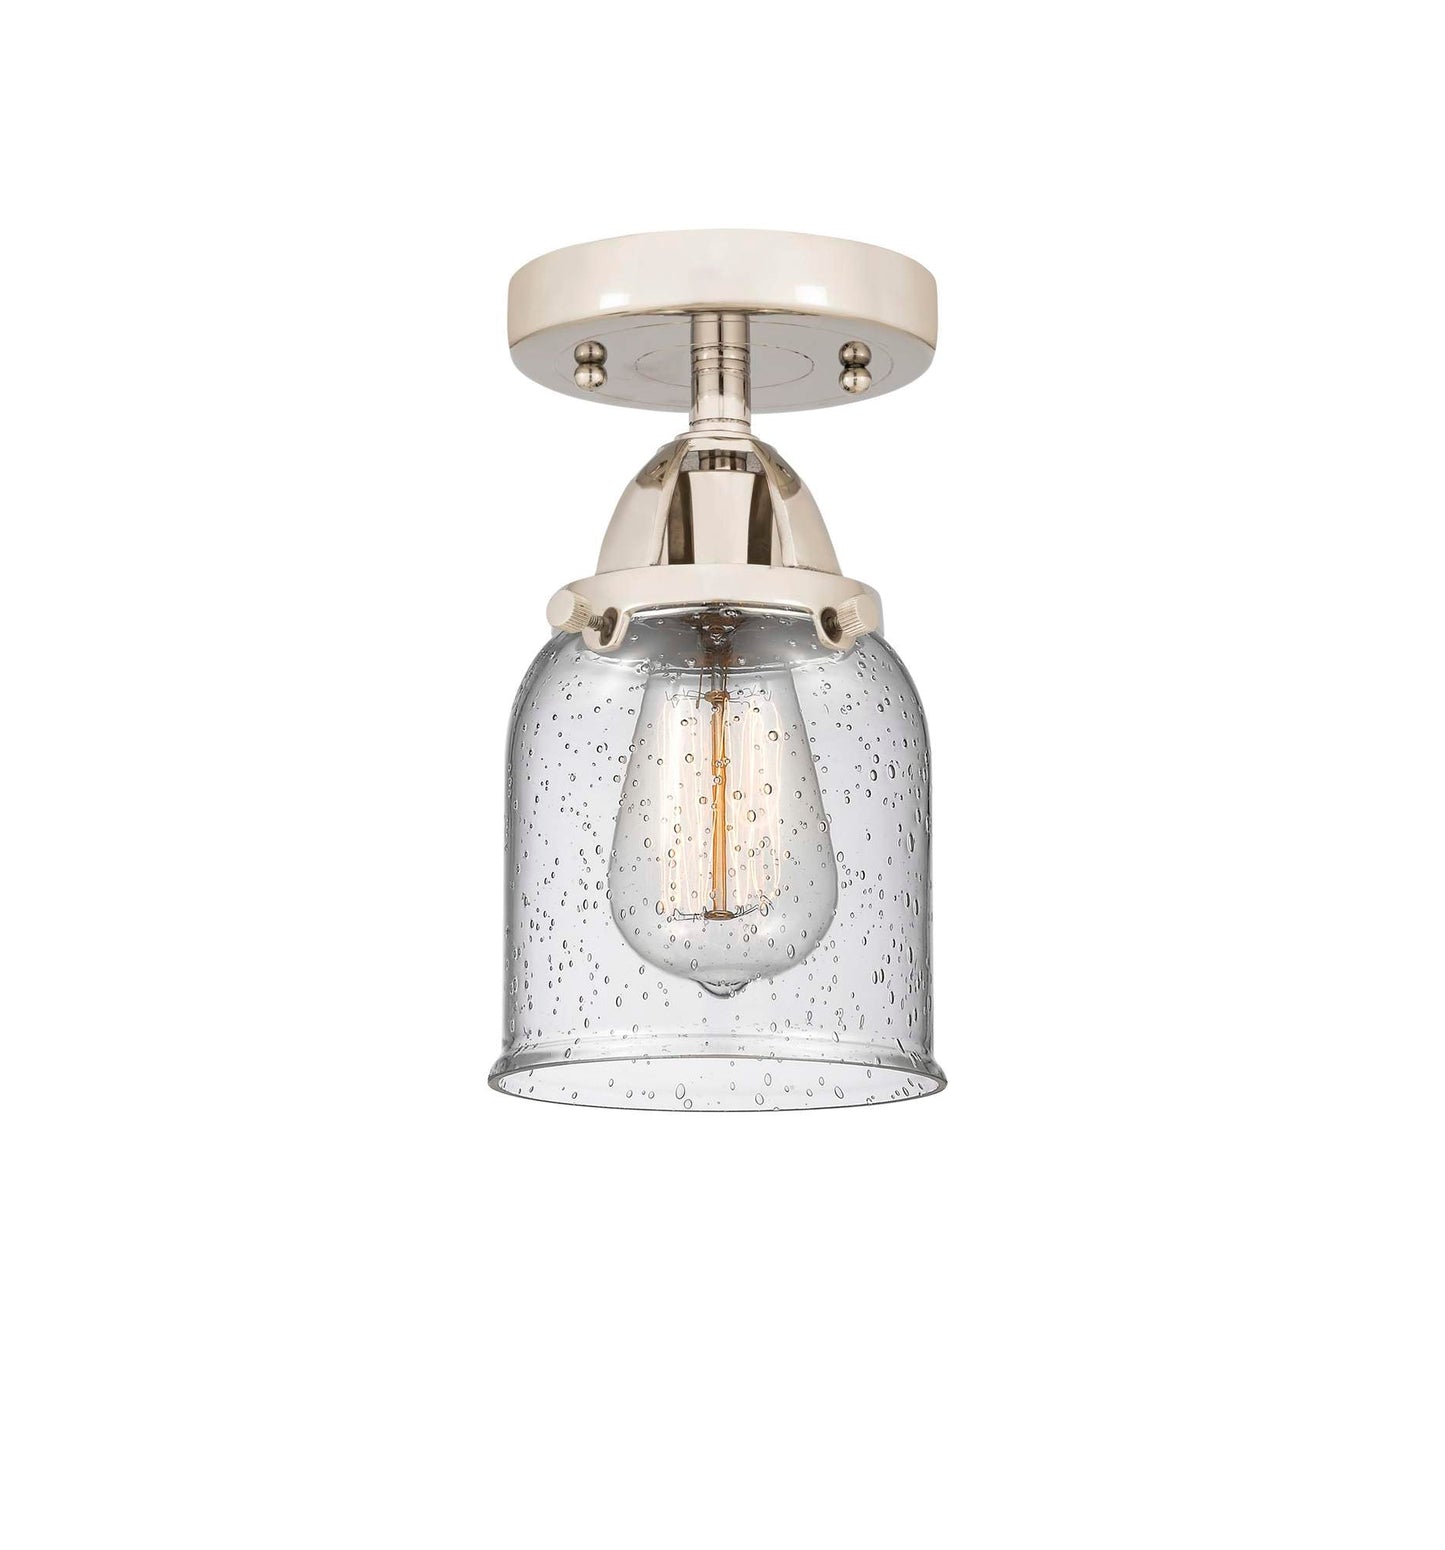 288-1C-PN-G54 1-Light 5" Polished Nickel Semi-Flush Mount - Seedy Small Bell Glass - LED Bulb - Dimmensions: 5 x 5 x 9.25 - Sloped Ceiling Compatible: No